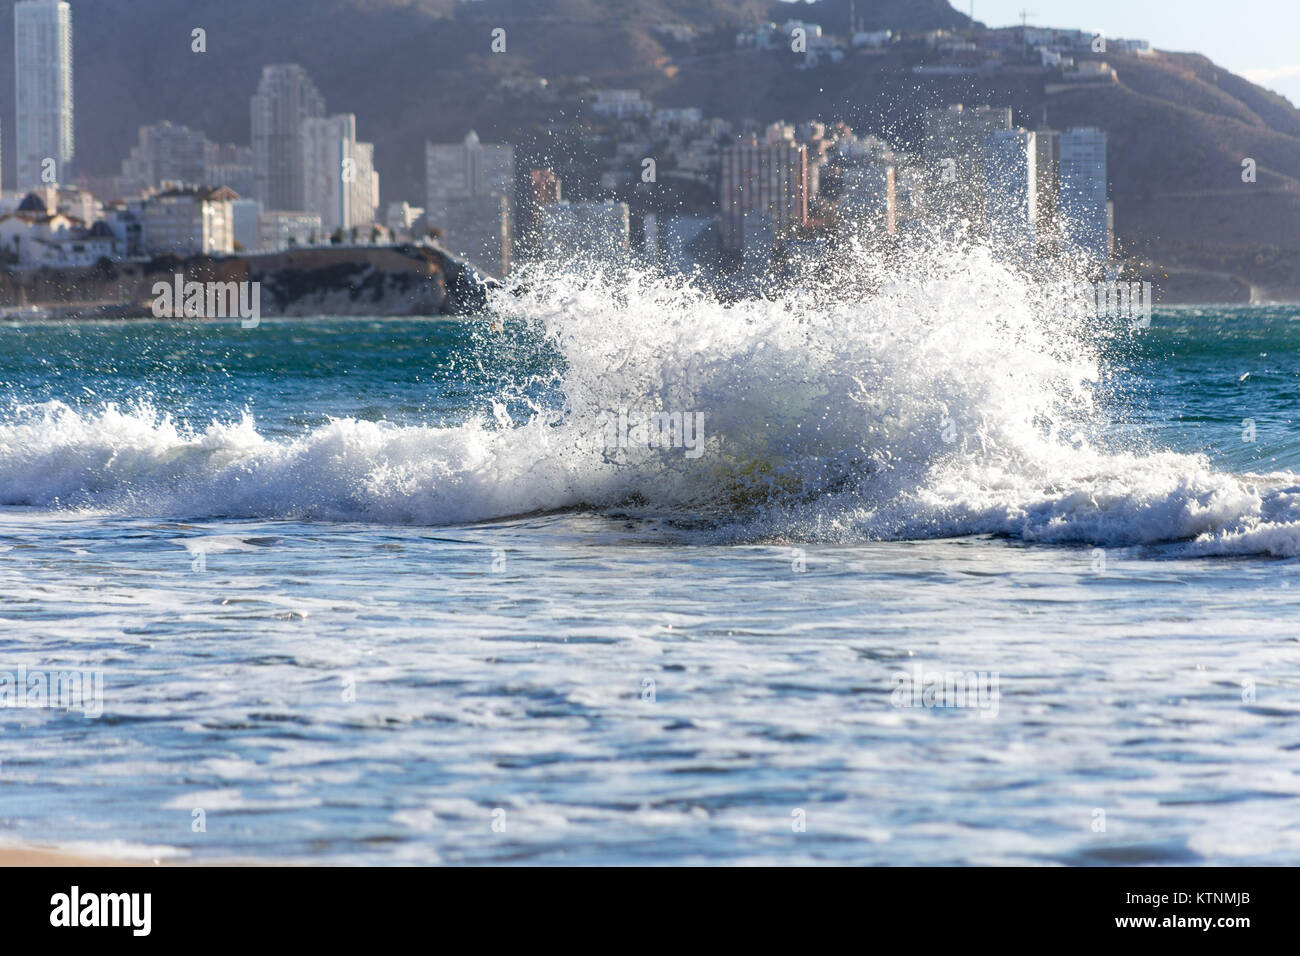 Benidorm, Costa Blanca, Spain, 27th December 2017. Storm Bruno sweeps across Spain and out to sea along the Costa Blanca coast. The crests of waves are whipped up and blown backwards as the wind blows. Credit: Mick Flynn/Alamy Live News Stock Photo